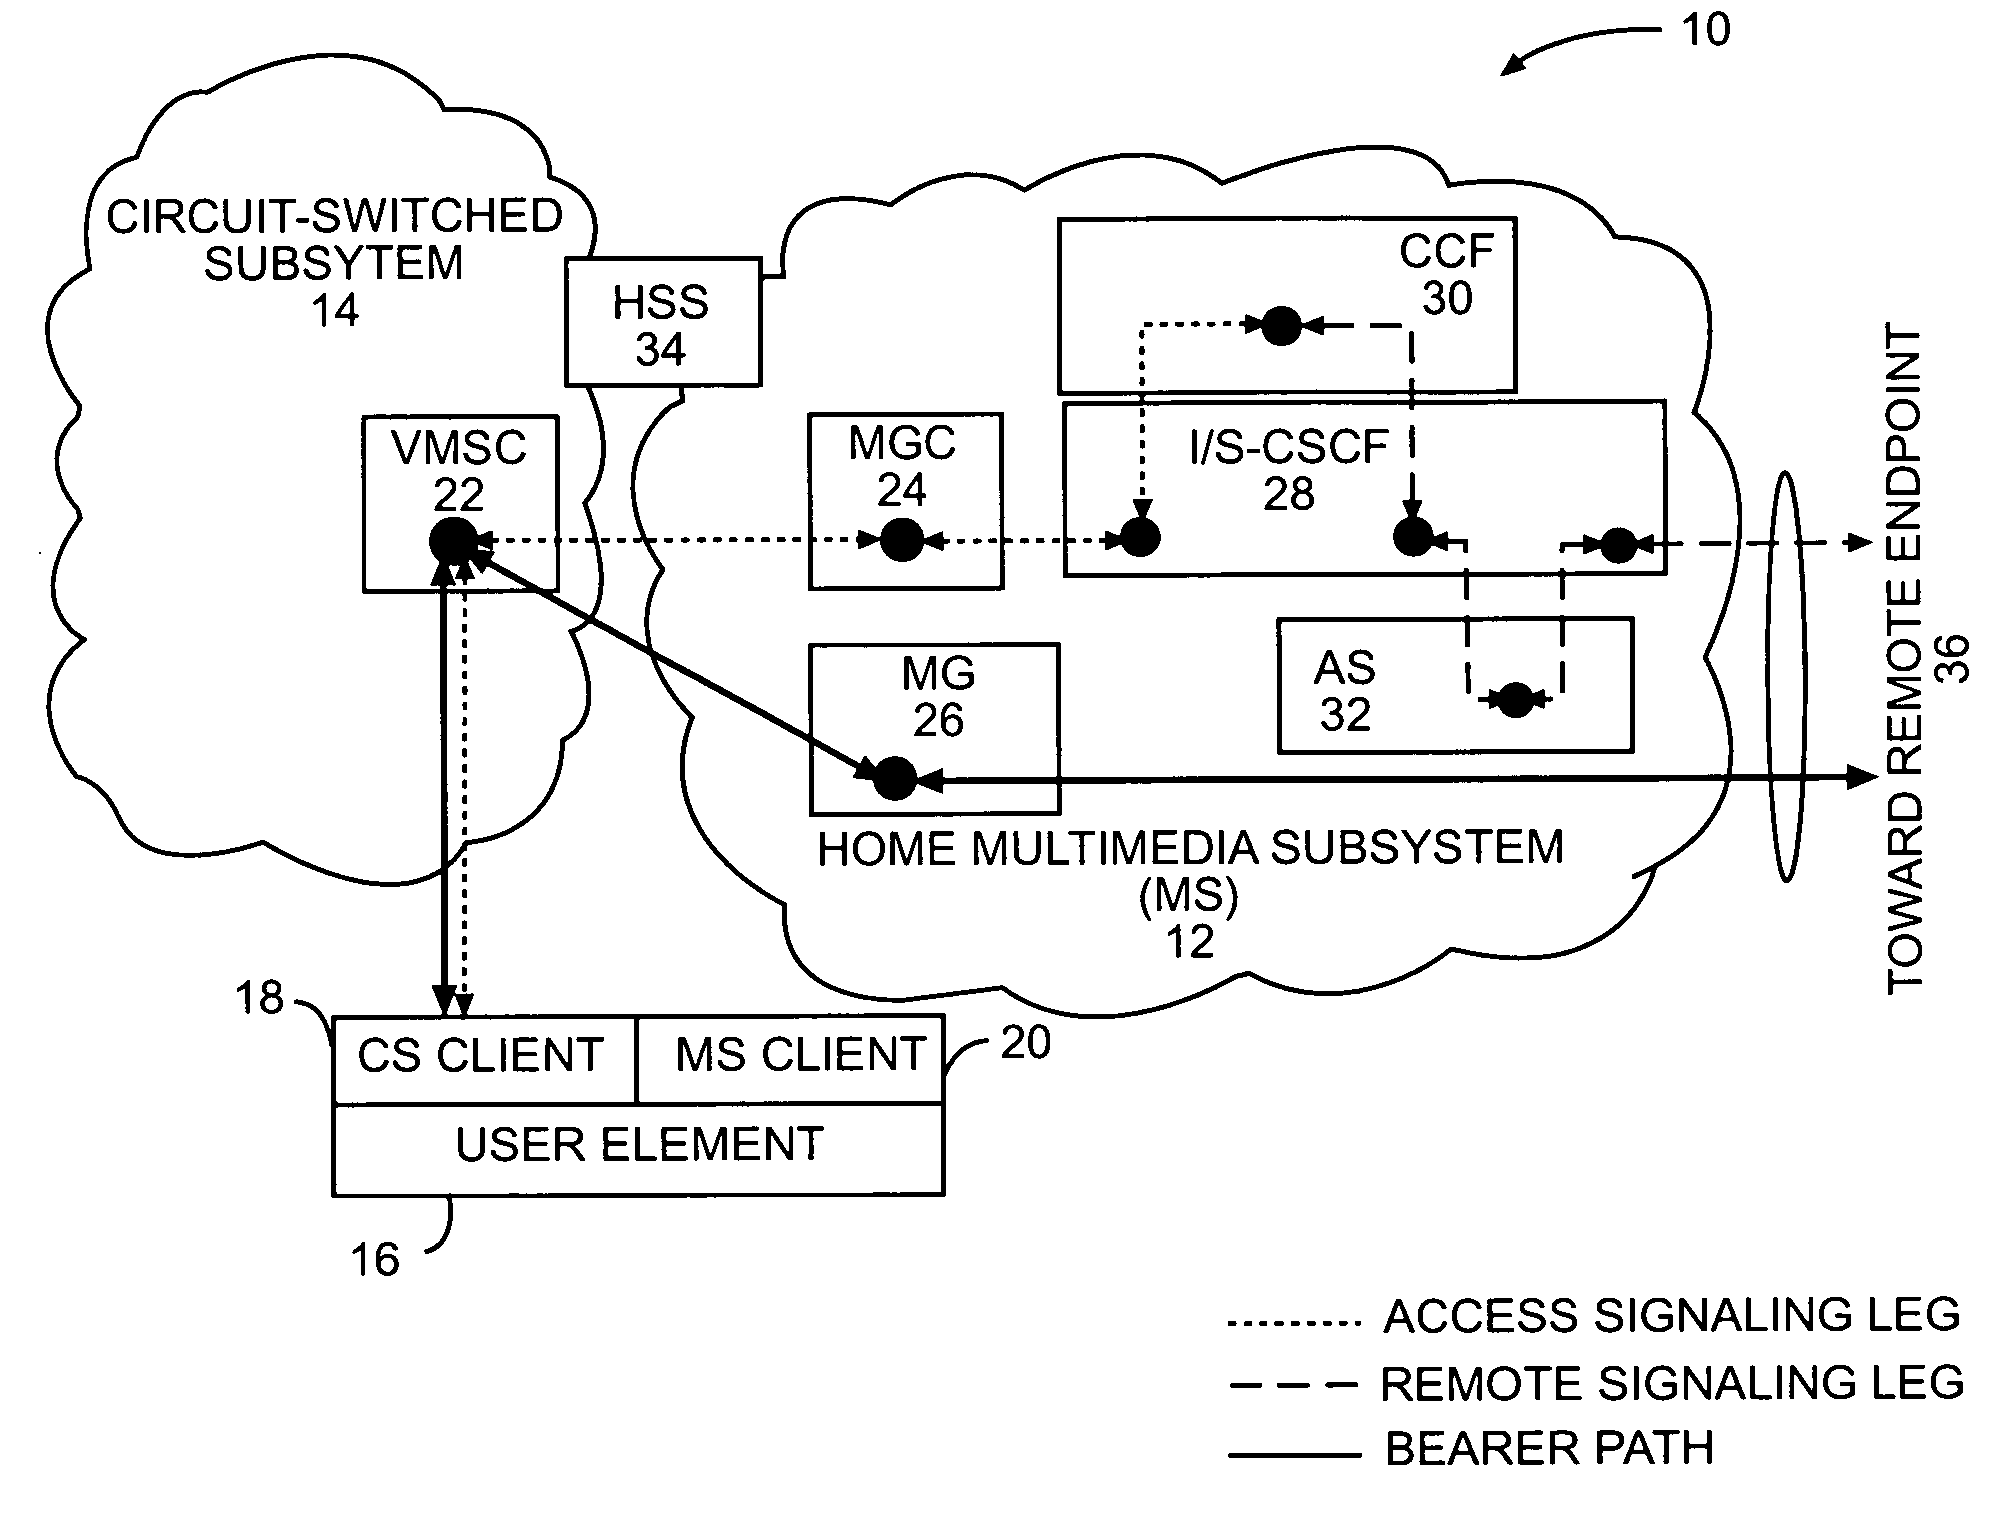 Circuit-switched and multimedia subsystem voice continuity